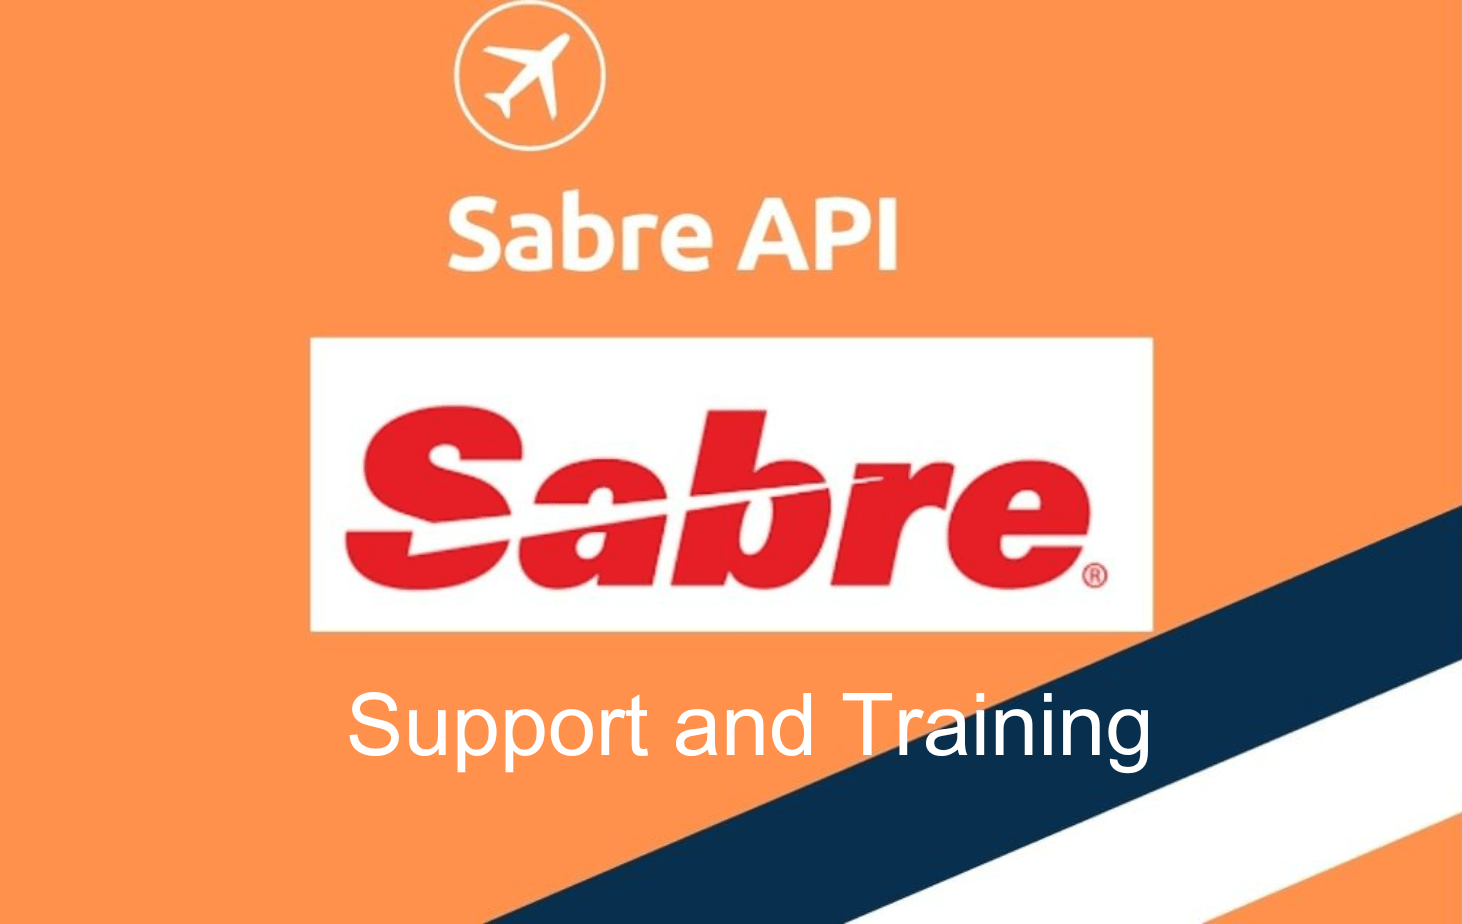 Sabre API Support and Training